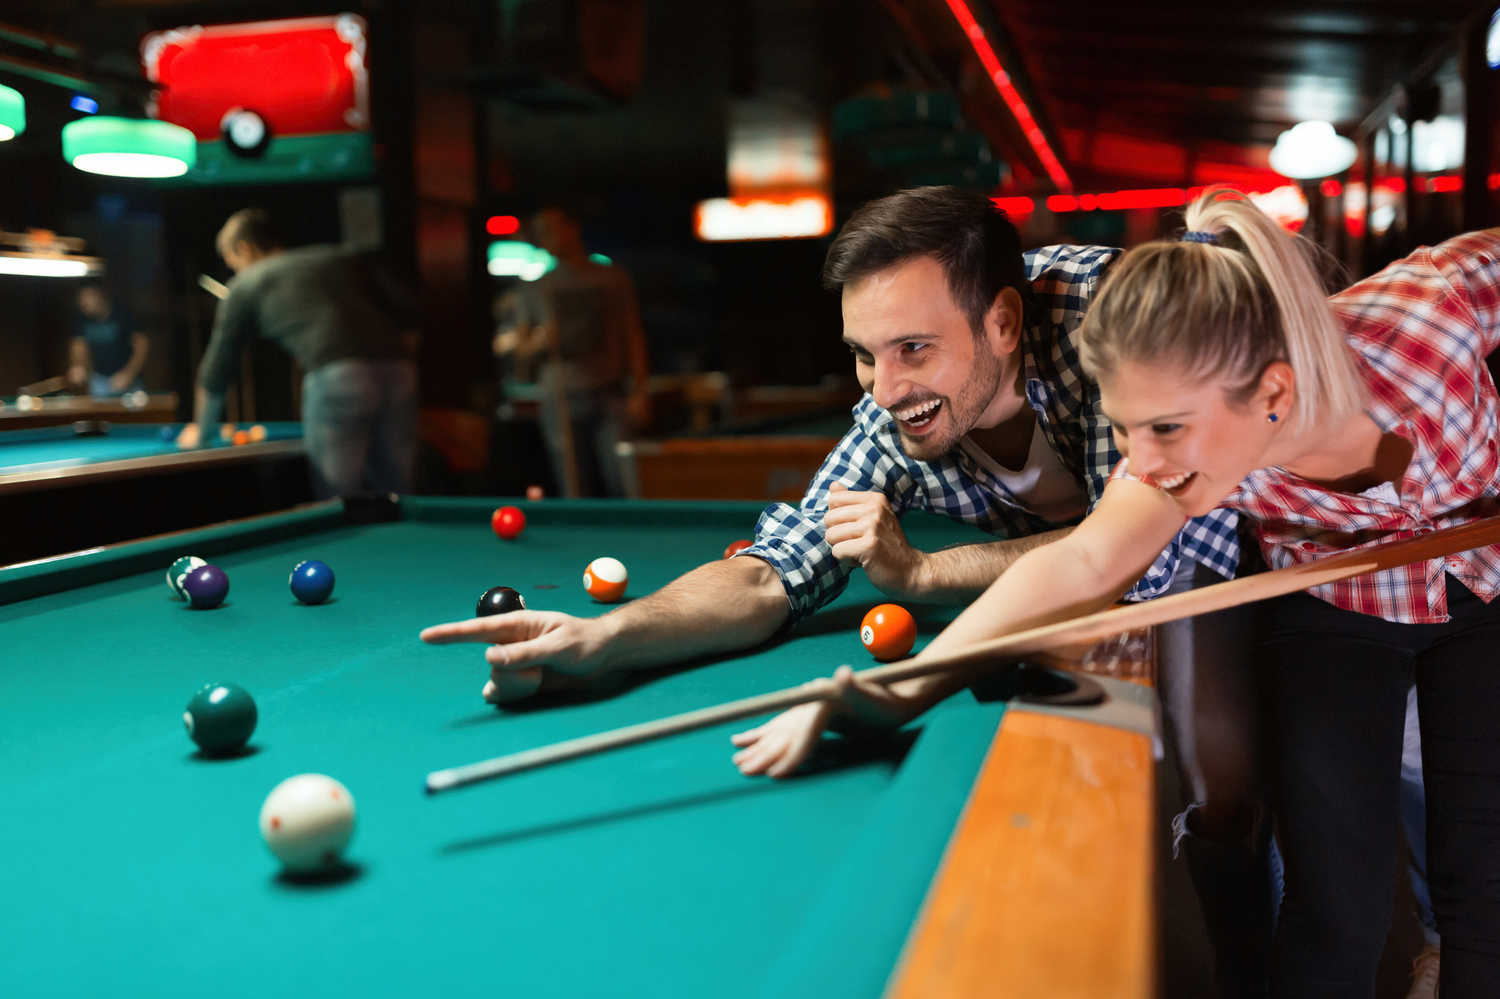 Couple dating and having fun playing snooker